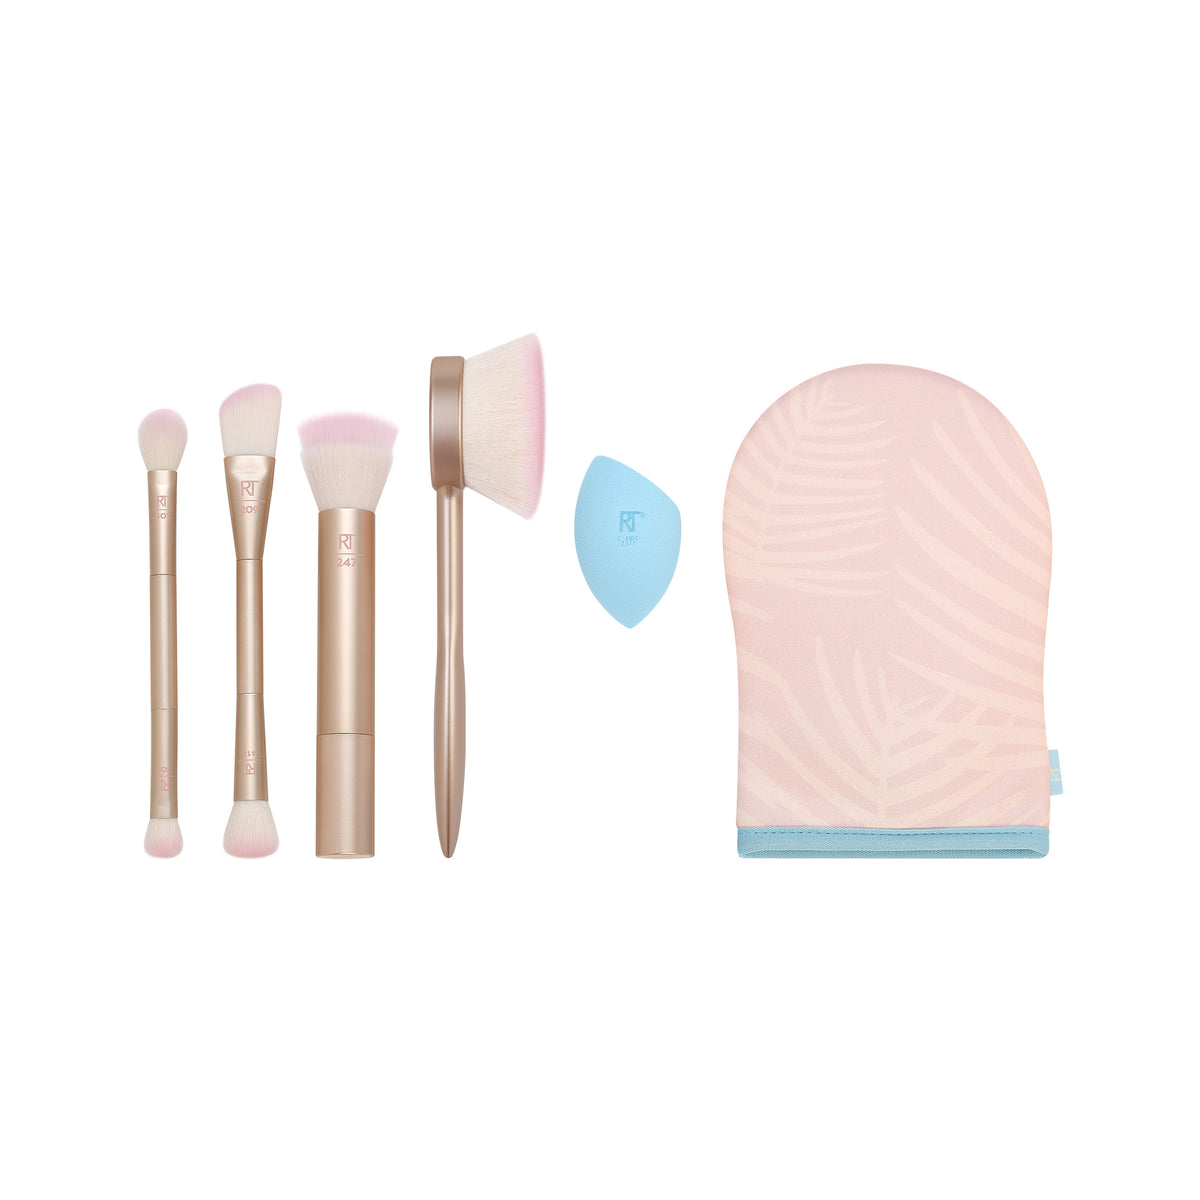 New Beauty Finds by ULTA Summer Essentials Kit – Available Now